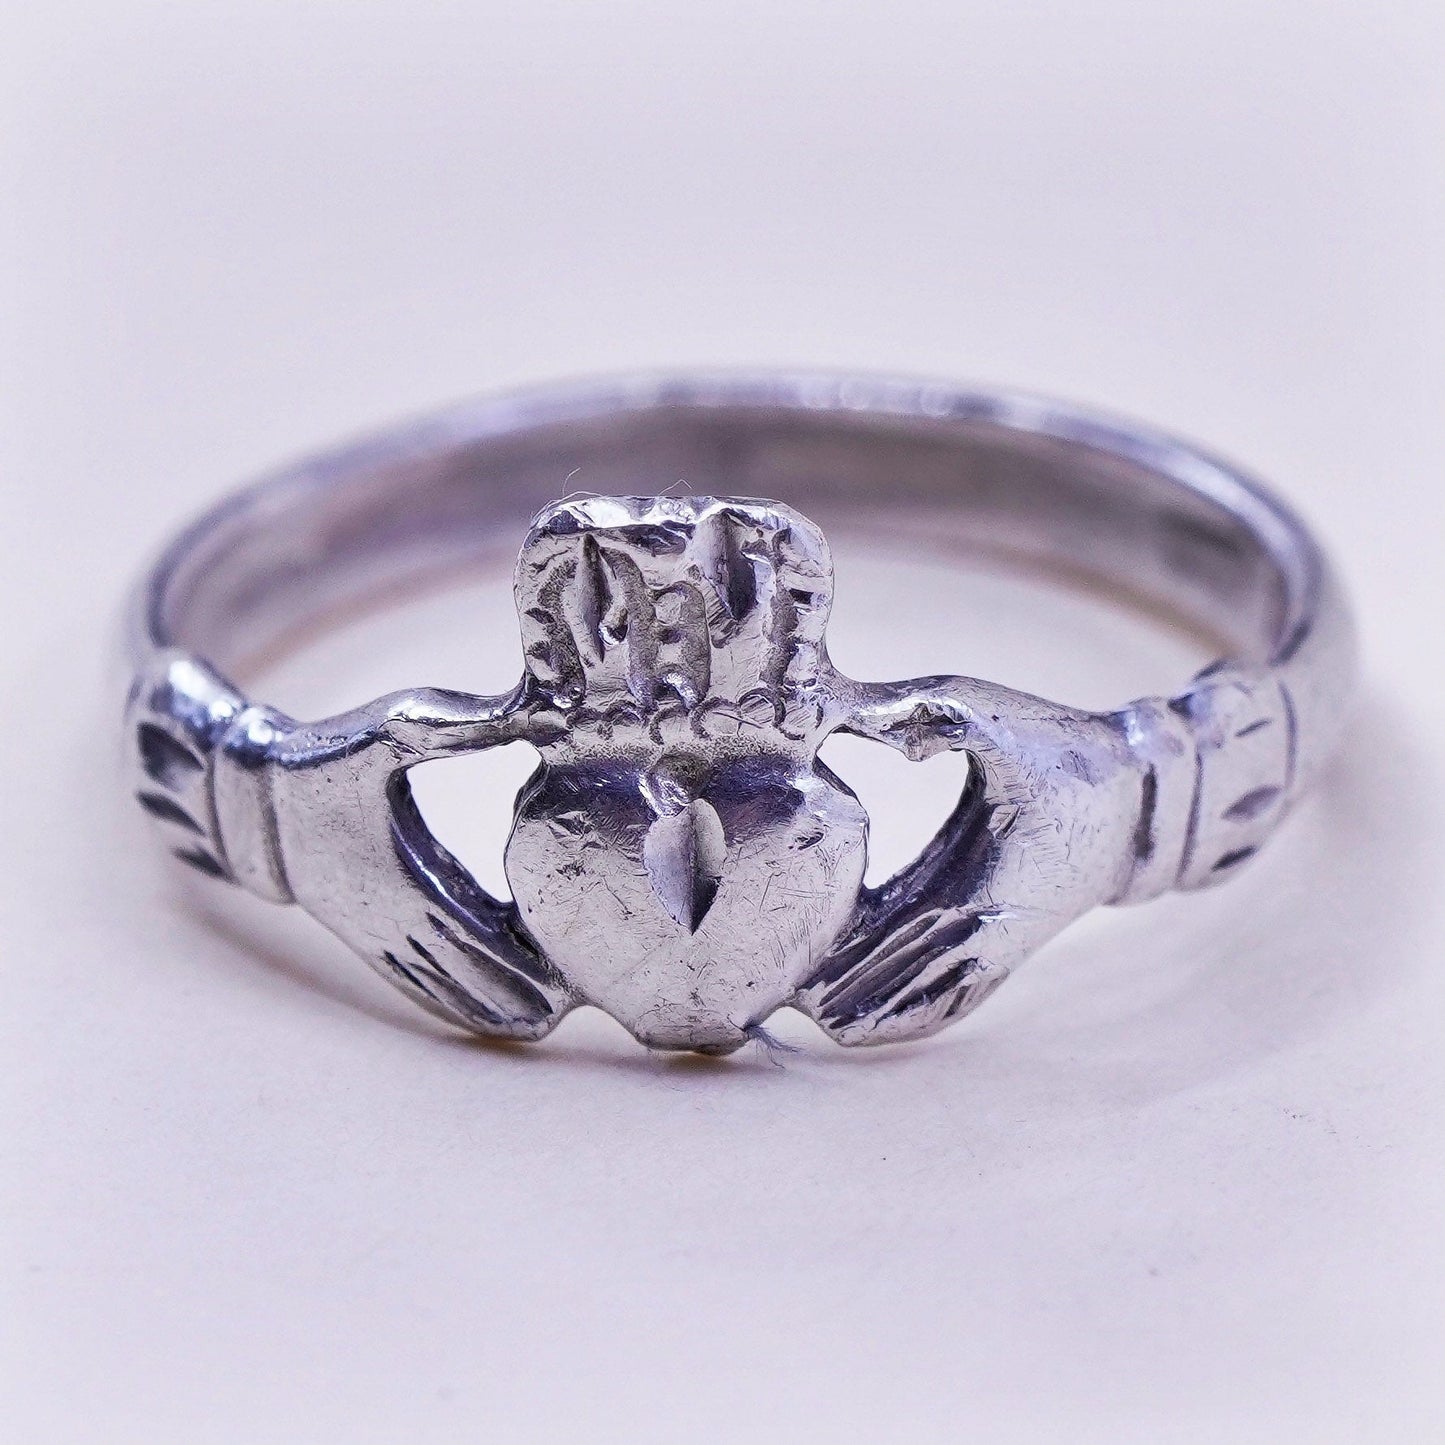 Size 7.75, Vintage sterling silver claddagh ring, holding heart 925 band